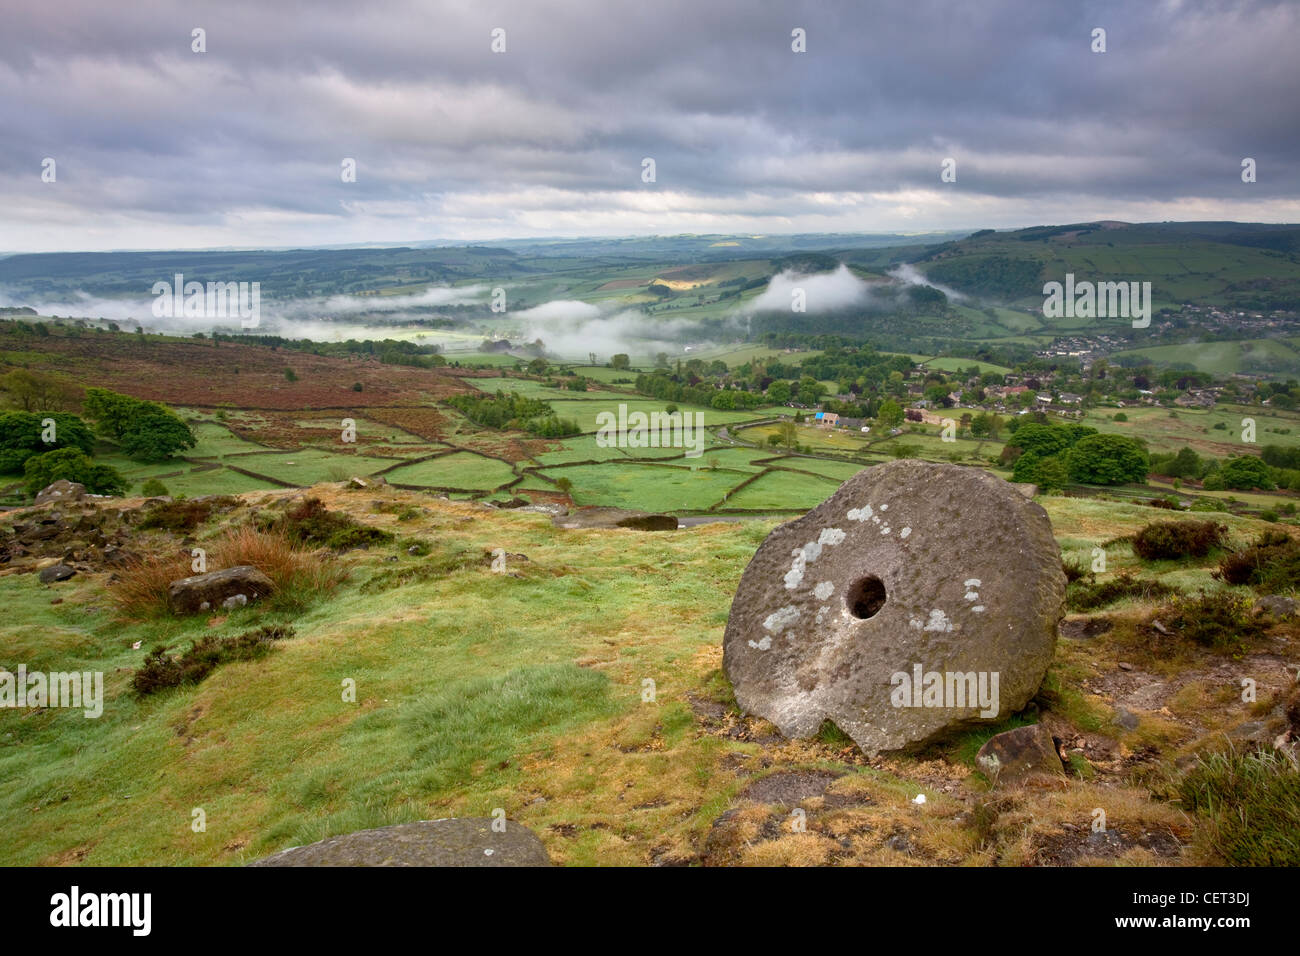 View at dawn from an abandoned millstone on Curbar edge to low lying mist in the valley below. Stock Photo